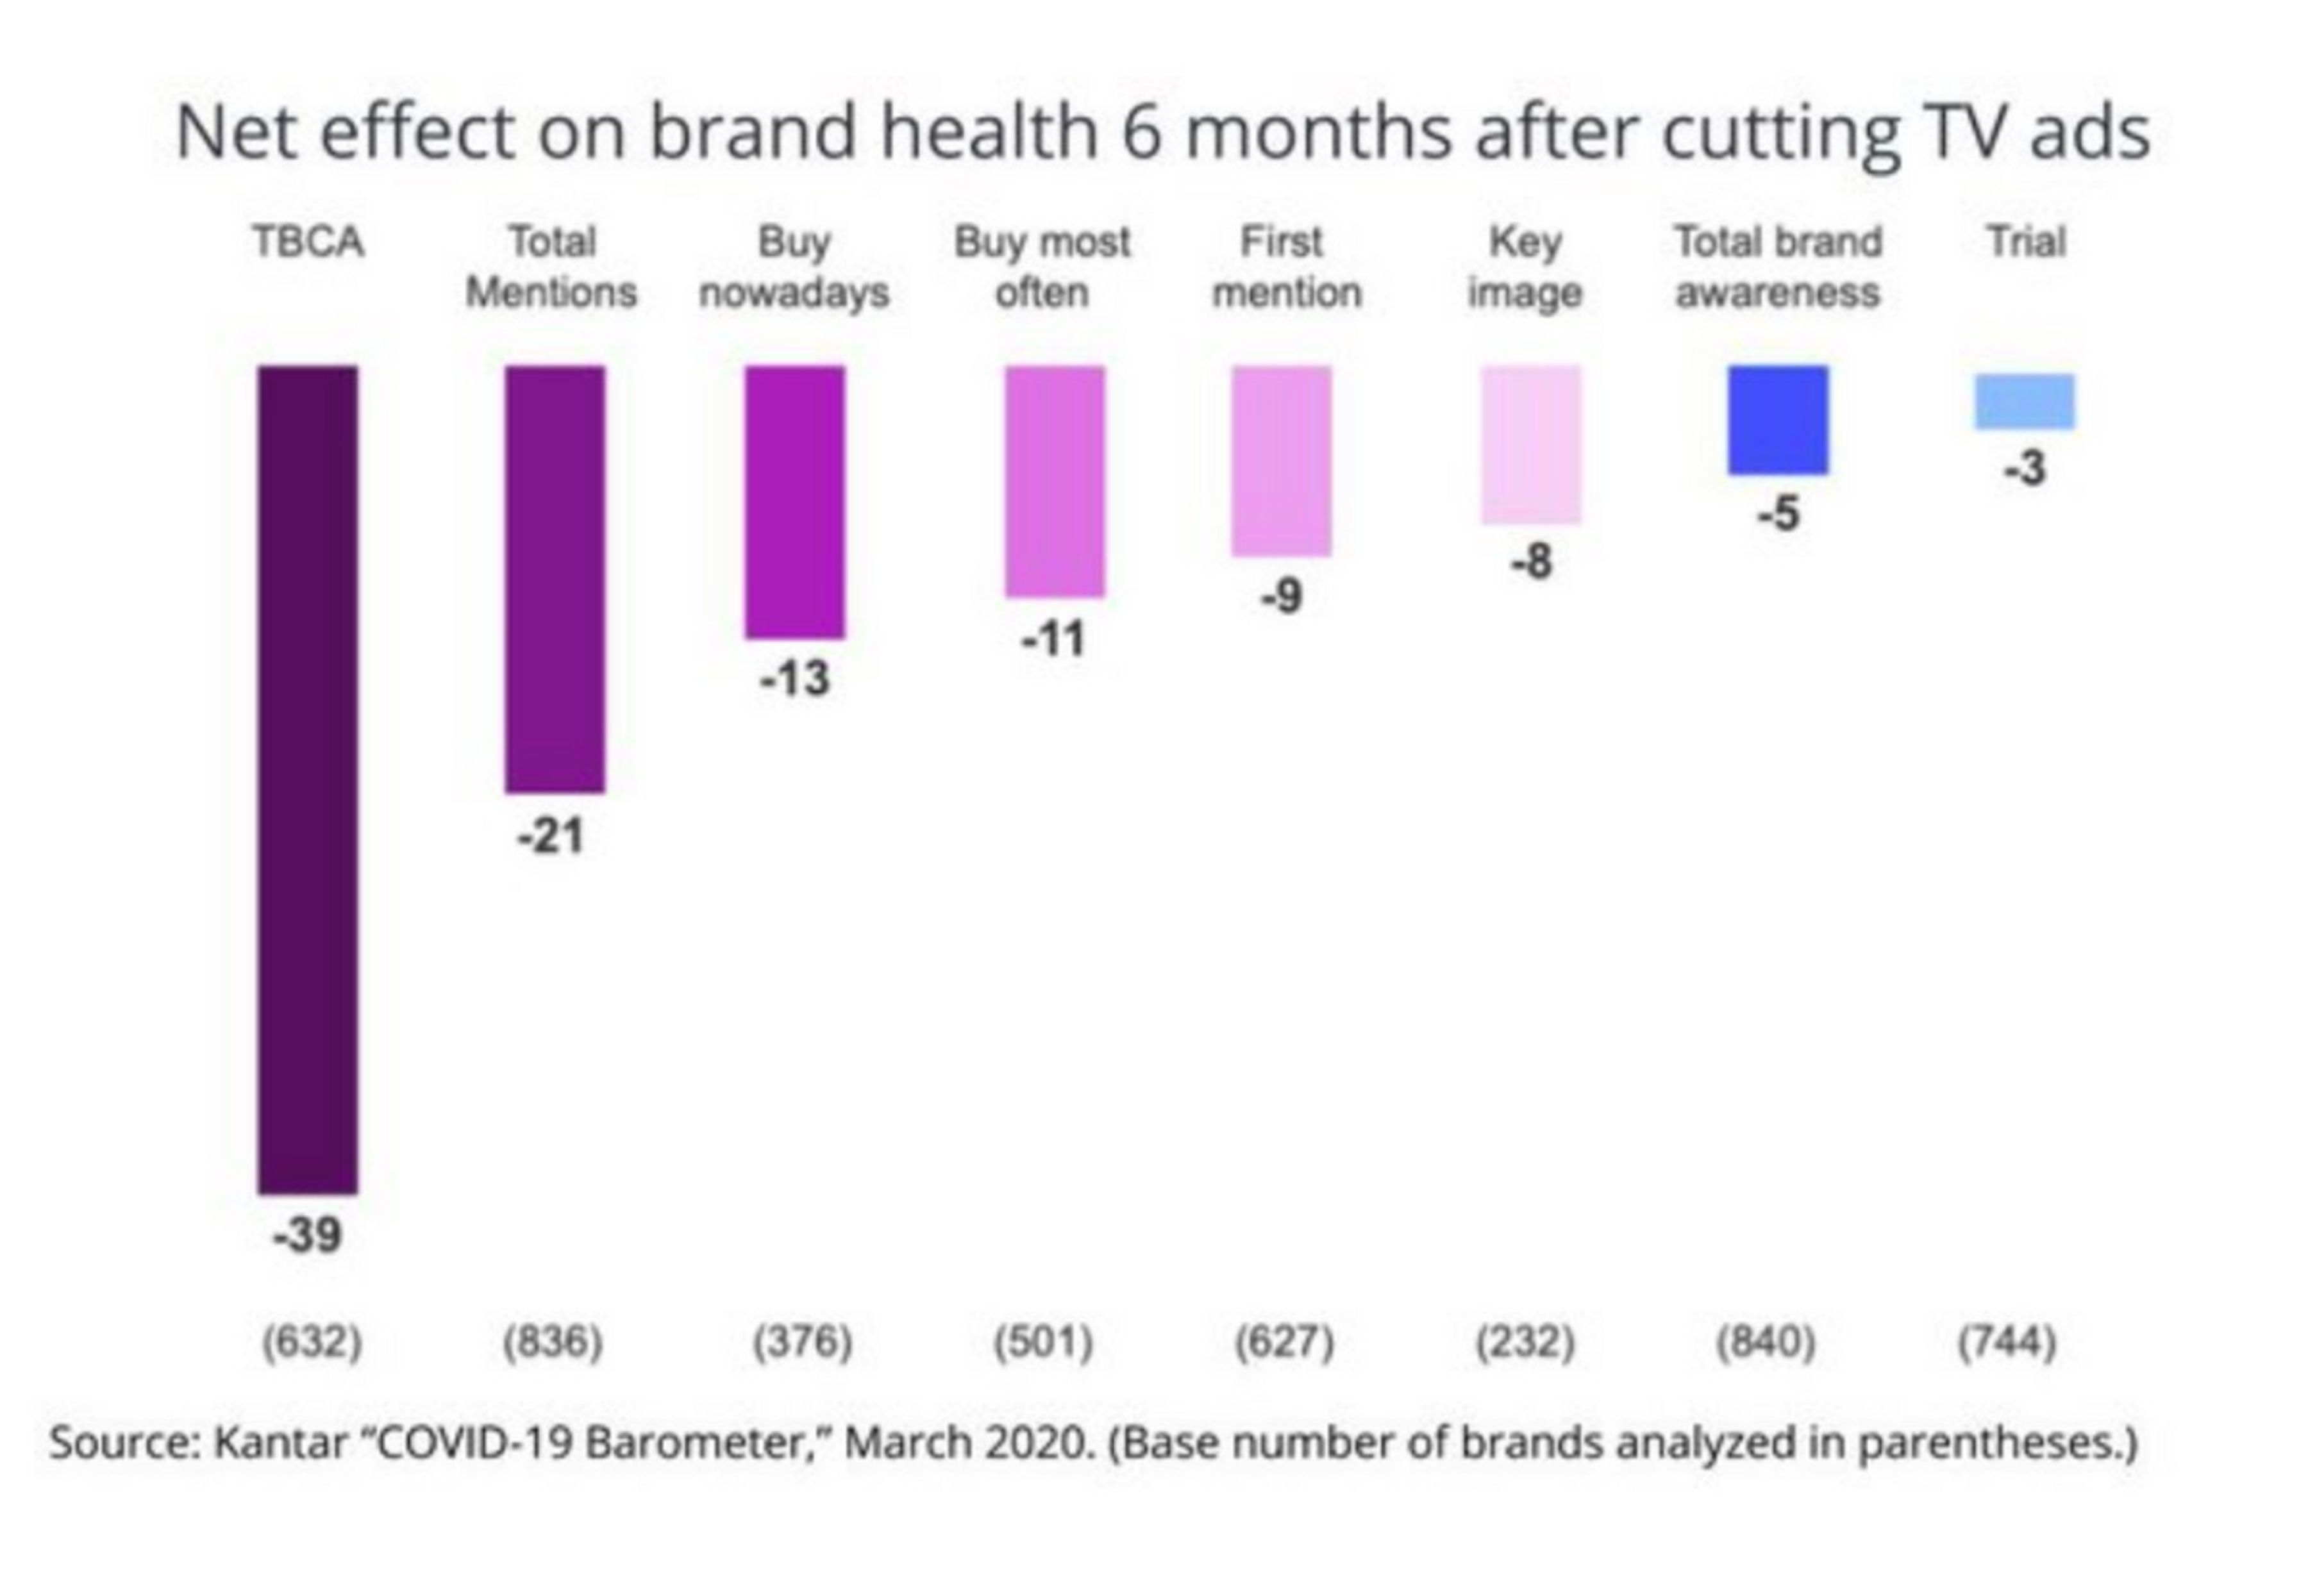 Chart showing the different effects on brand health 6 months after cutting TV advertising.